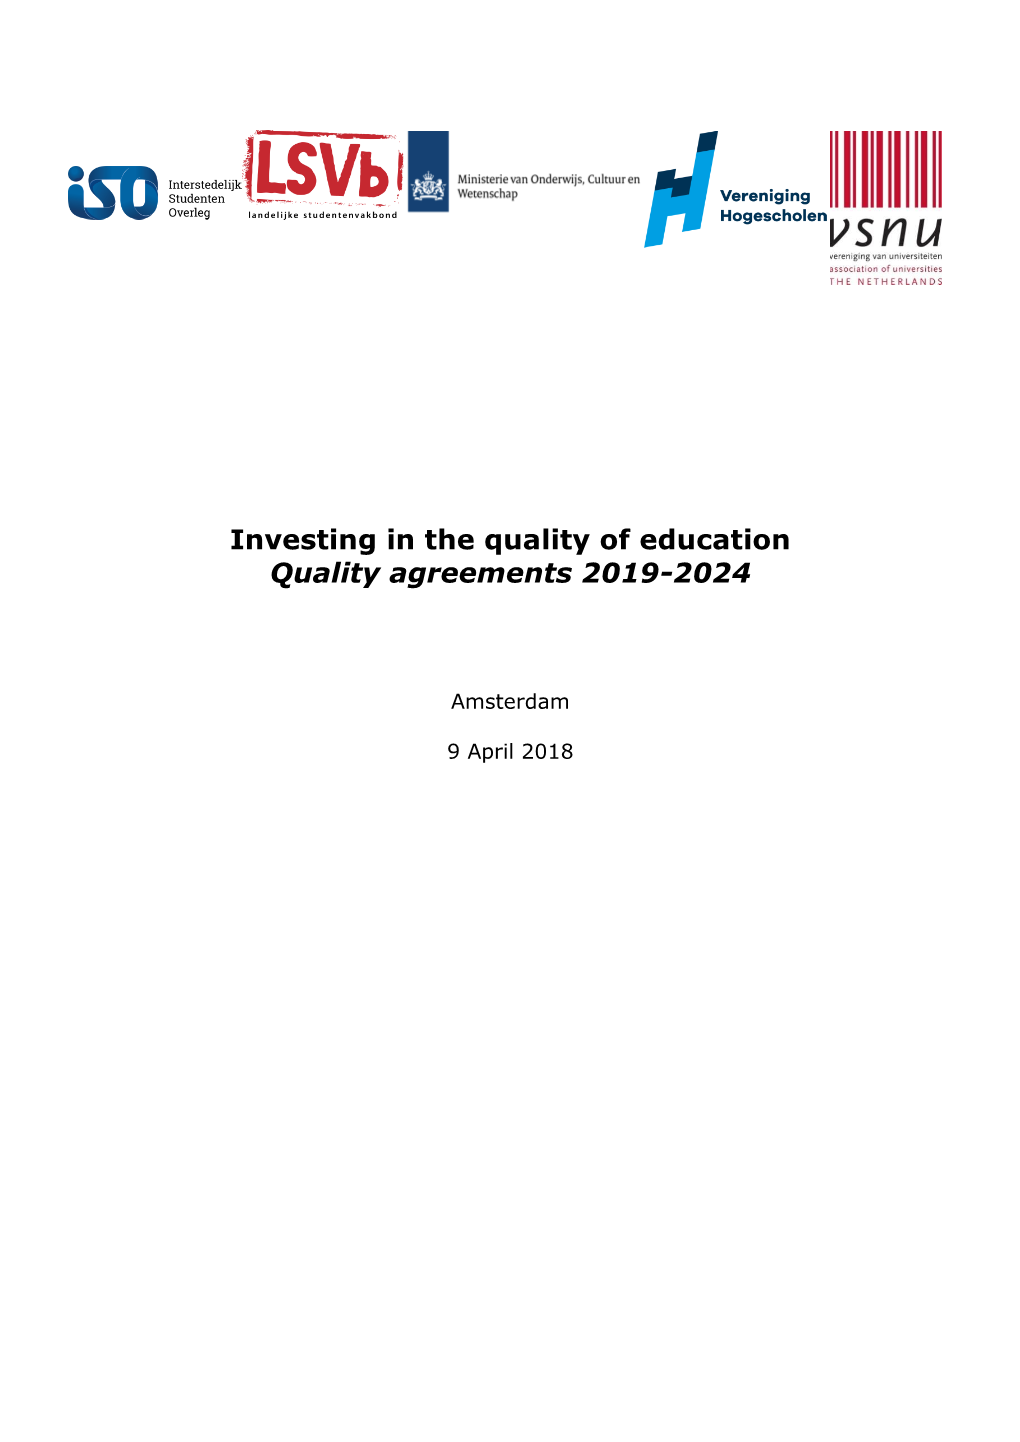 Investing in the Quality of Education Quality Agreements 2019-2024